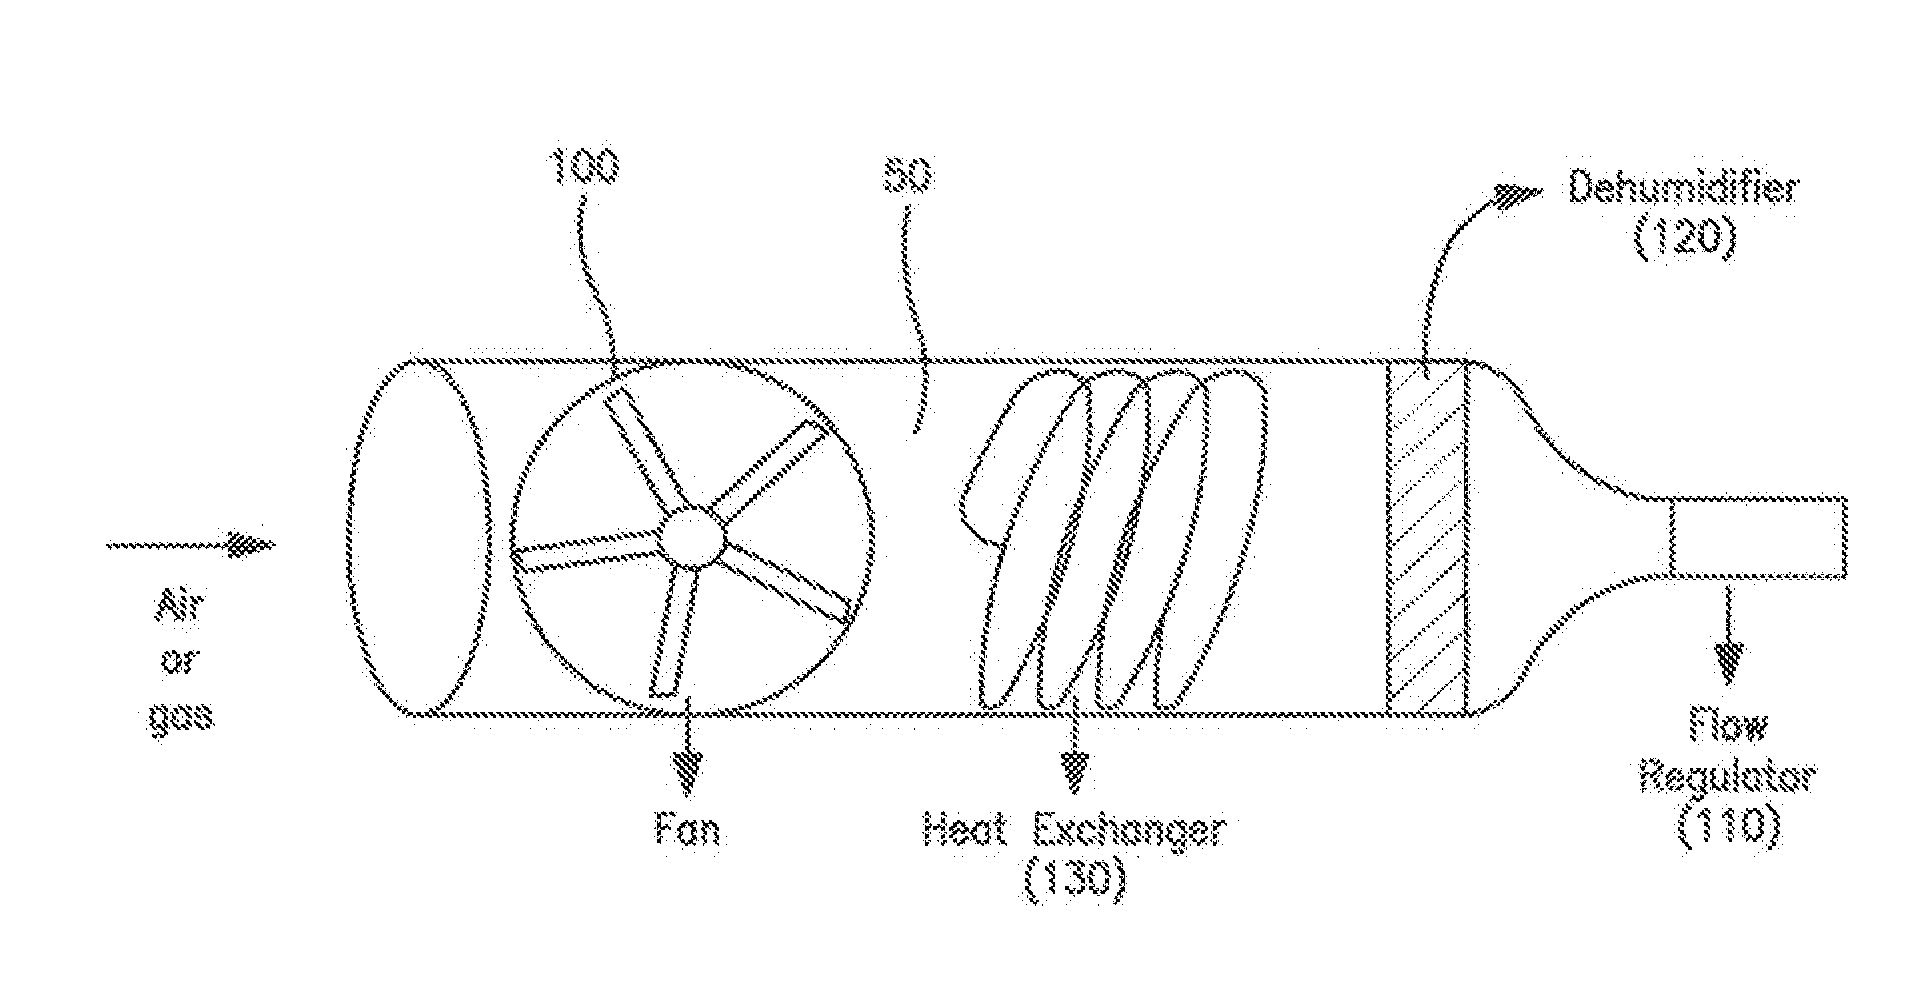 Method and device for non-invasive anatomical and systemic cooling and neuroprotection